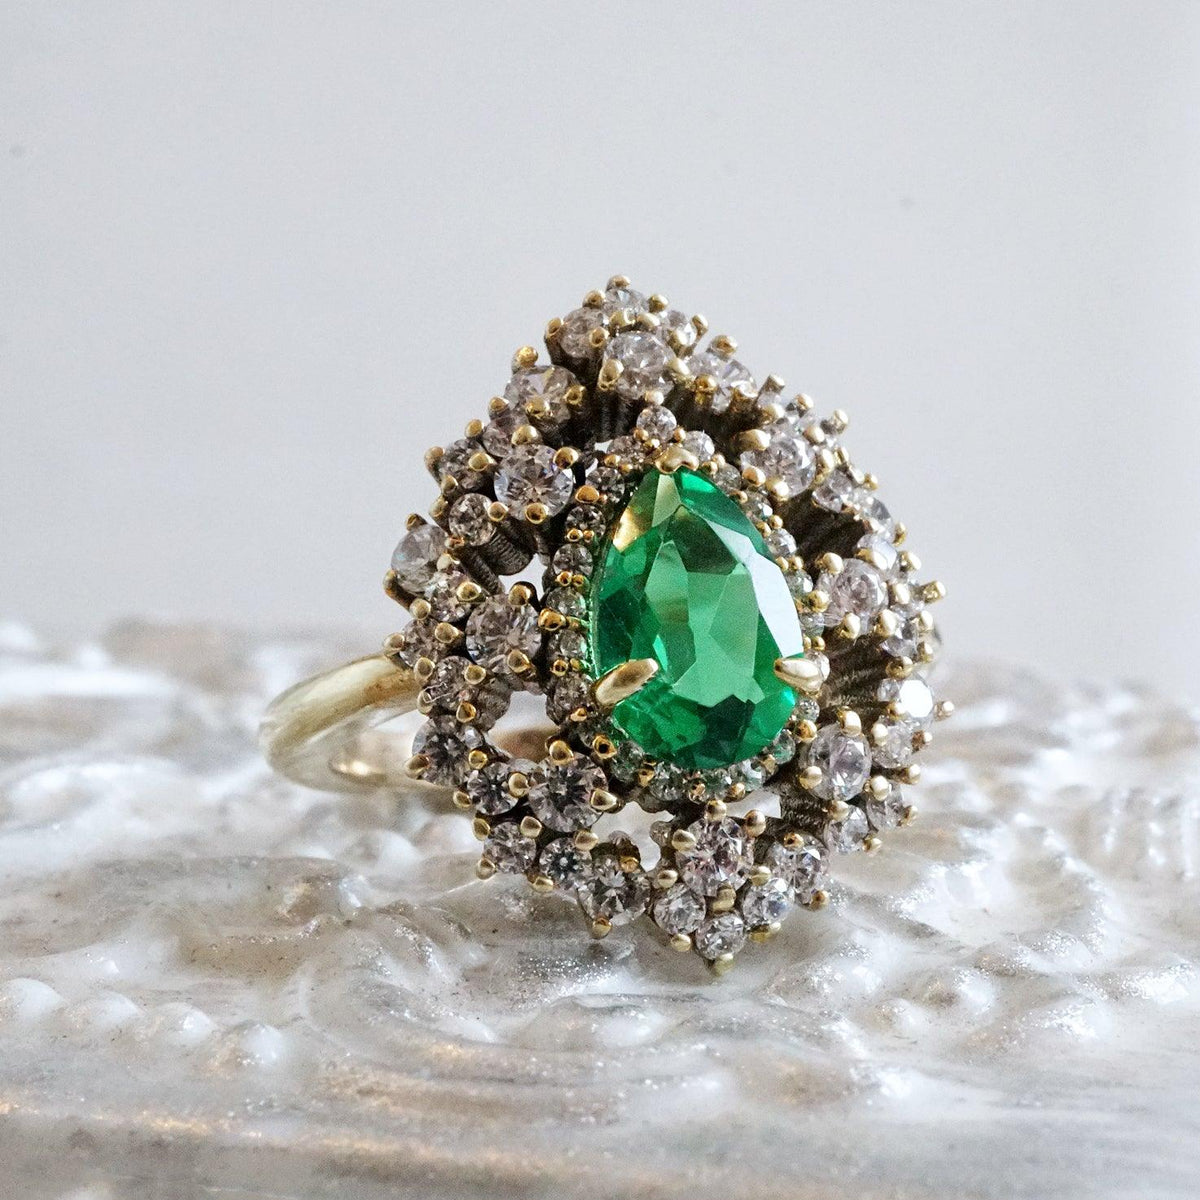 Forest Queen Emerald Diamond Ring in 14K and 18K Gold